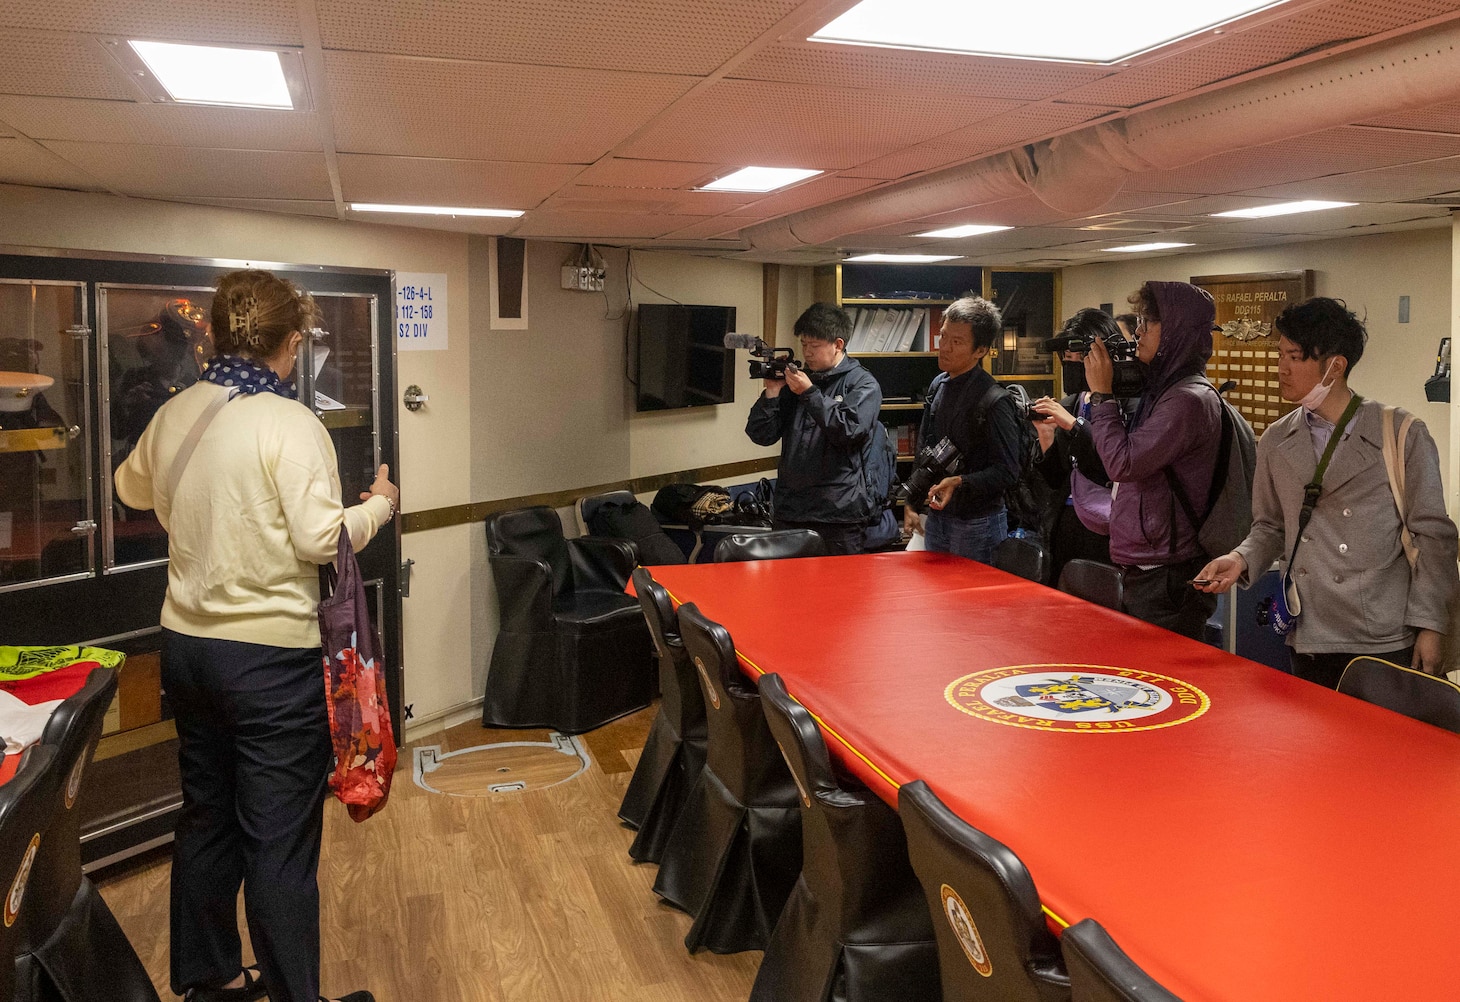 ISHIGAKI, Japan (Mar. 11, 2024) Local media tour the wardroom of the Arleigh Burke-class guided-missile destroyer USS Rafael Peralta (DDG 115) in Ishigaki, Japan during a regularly scheduled port visit. Rafael Peralta is the first United States destroyer to visit Ishigaki. Rafael Peralta is forward-deployed and assigned to Destroyer Squadron (DESRON) 15, the Navy’s largest DESRON and the U.S. 7th Fleet’s principal surface force. (U.S. Navy photo by Mass Communication Specialist 1st Class Devin Monroe)